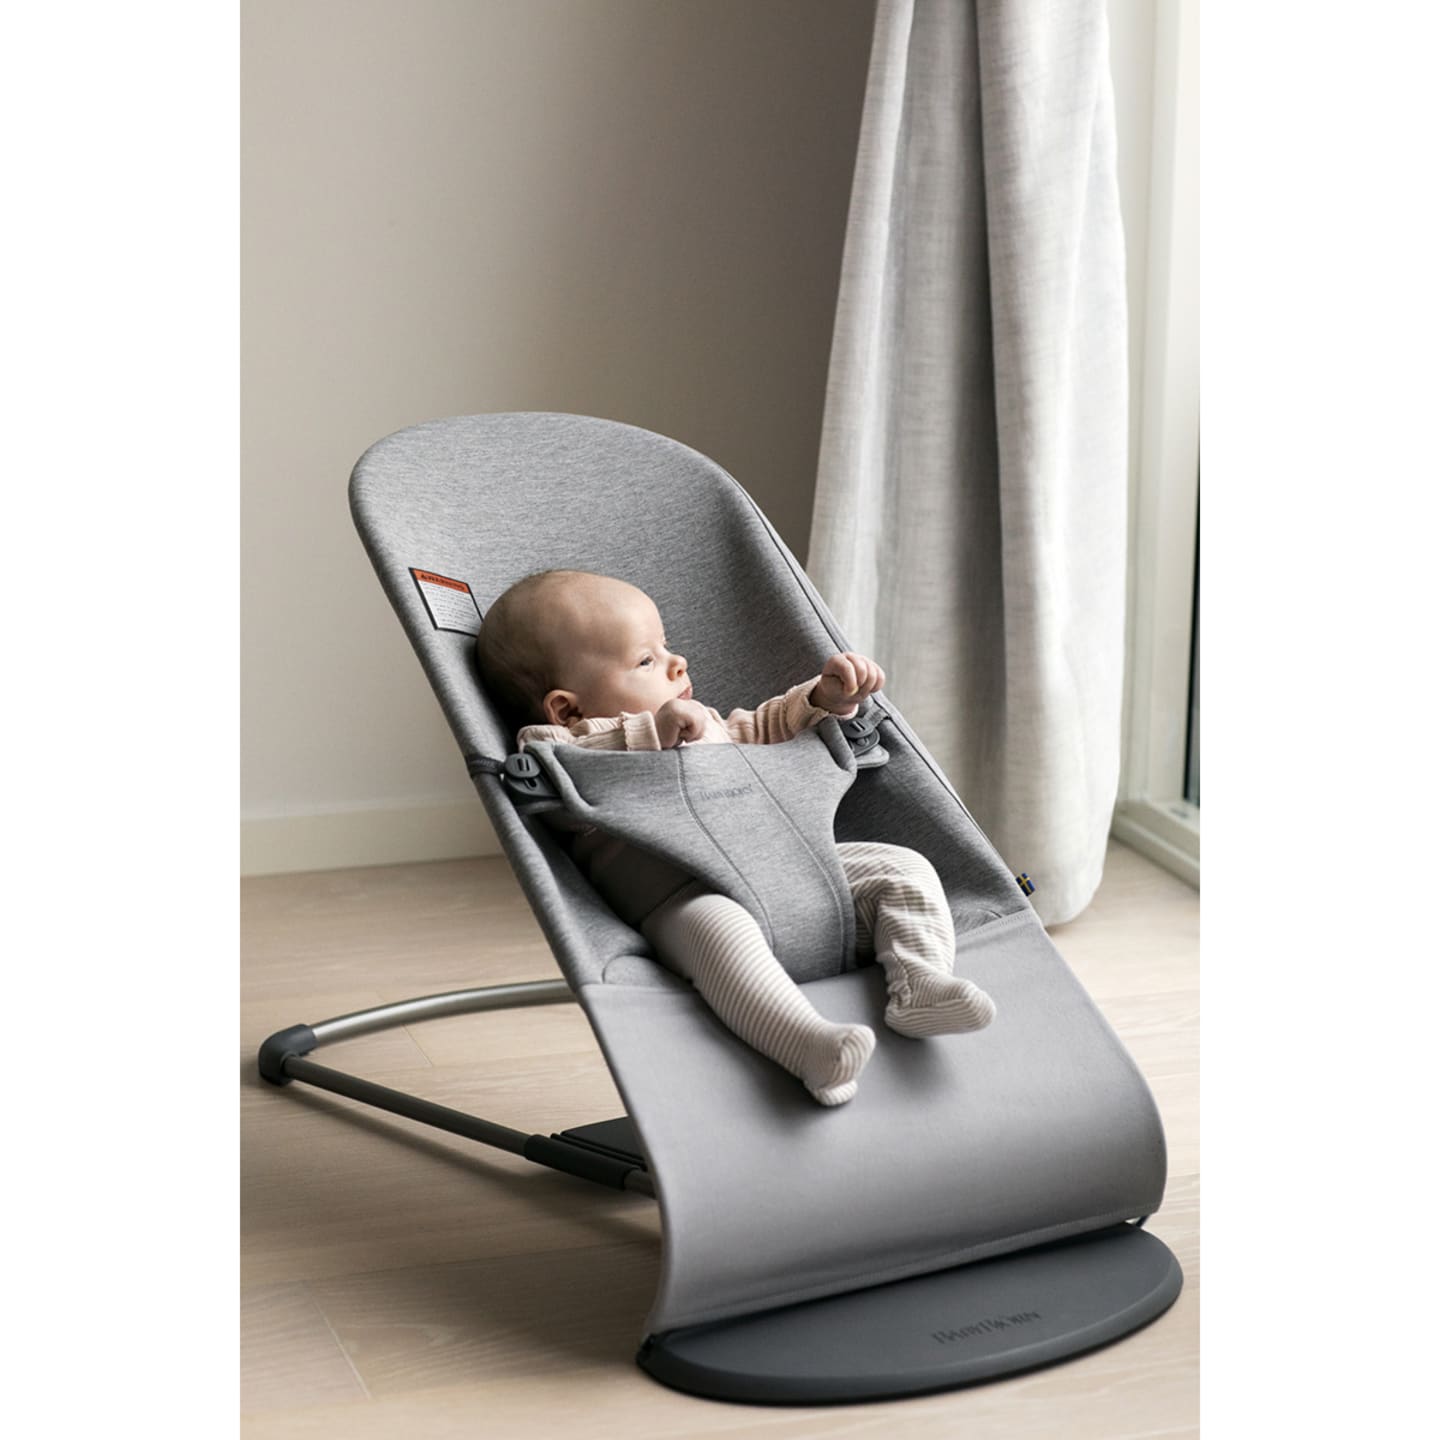 Is the Baby Bjorn Bouncer Seat Worth It? Unequivocally Yes.